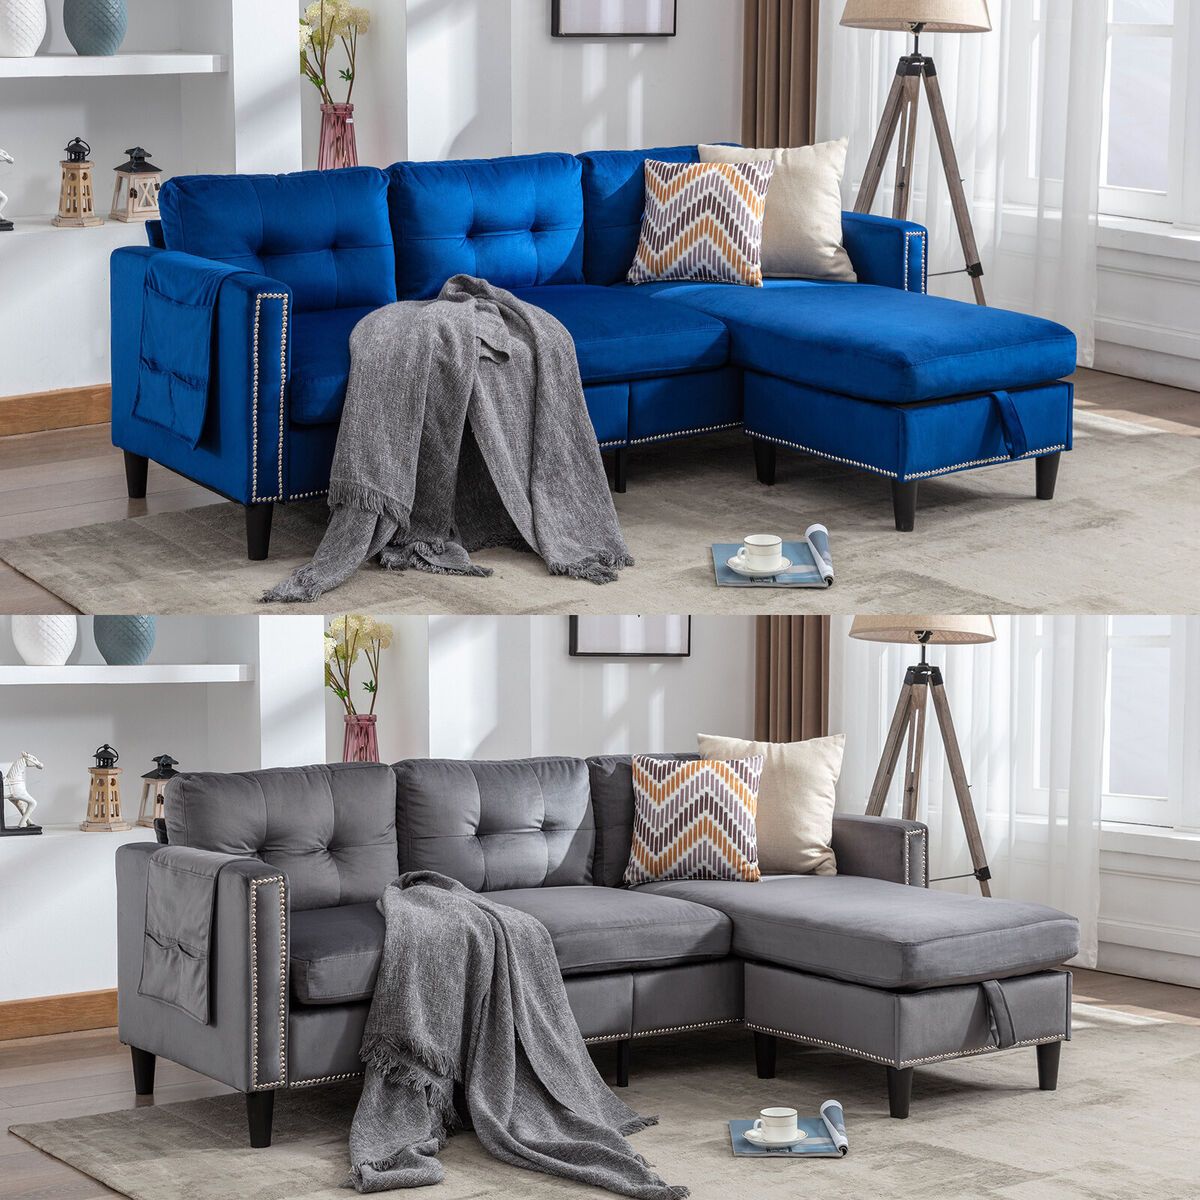 Gray/blue Velvet L Shape Convertible Sofa Couch Reversible Chaise W/  Storage,usb | Ebay Intended For L Shape Couches With Reversible Chaises (View 14 of 15)